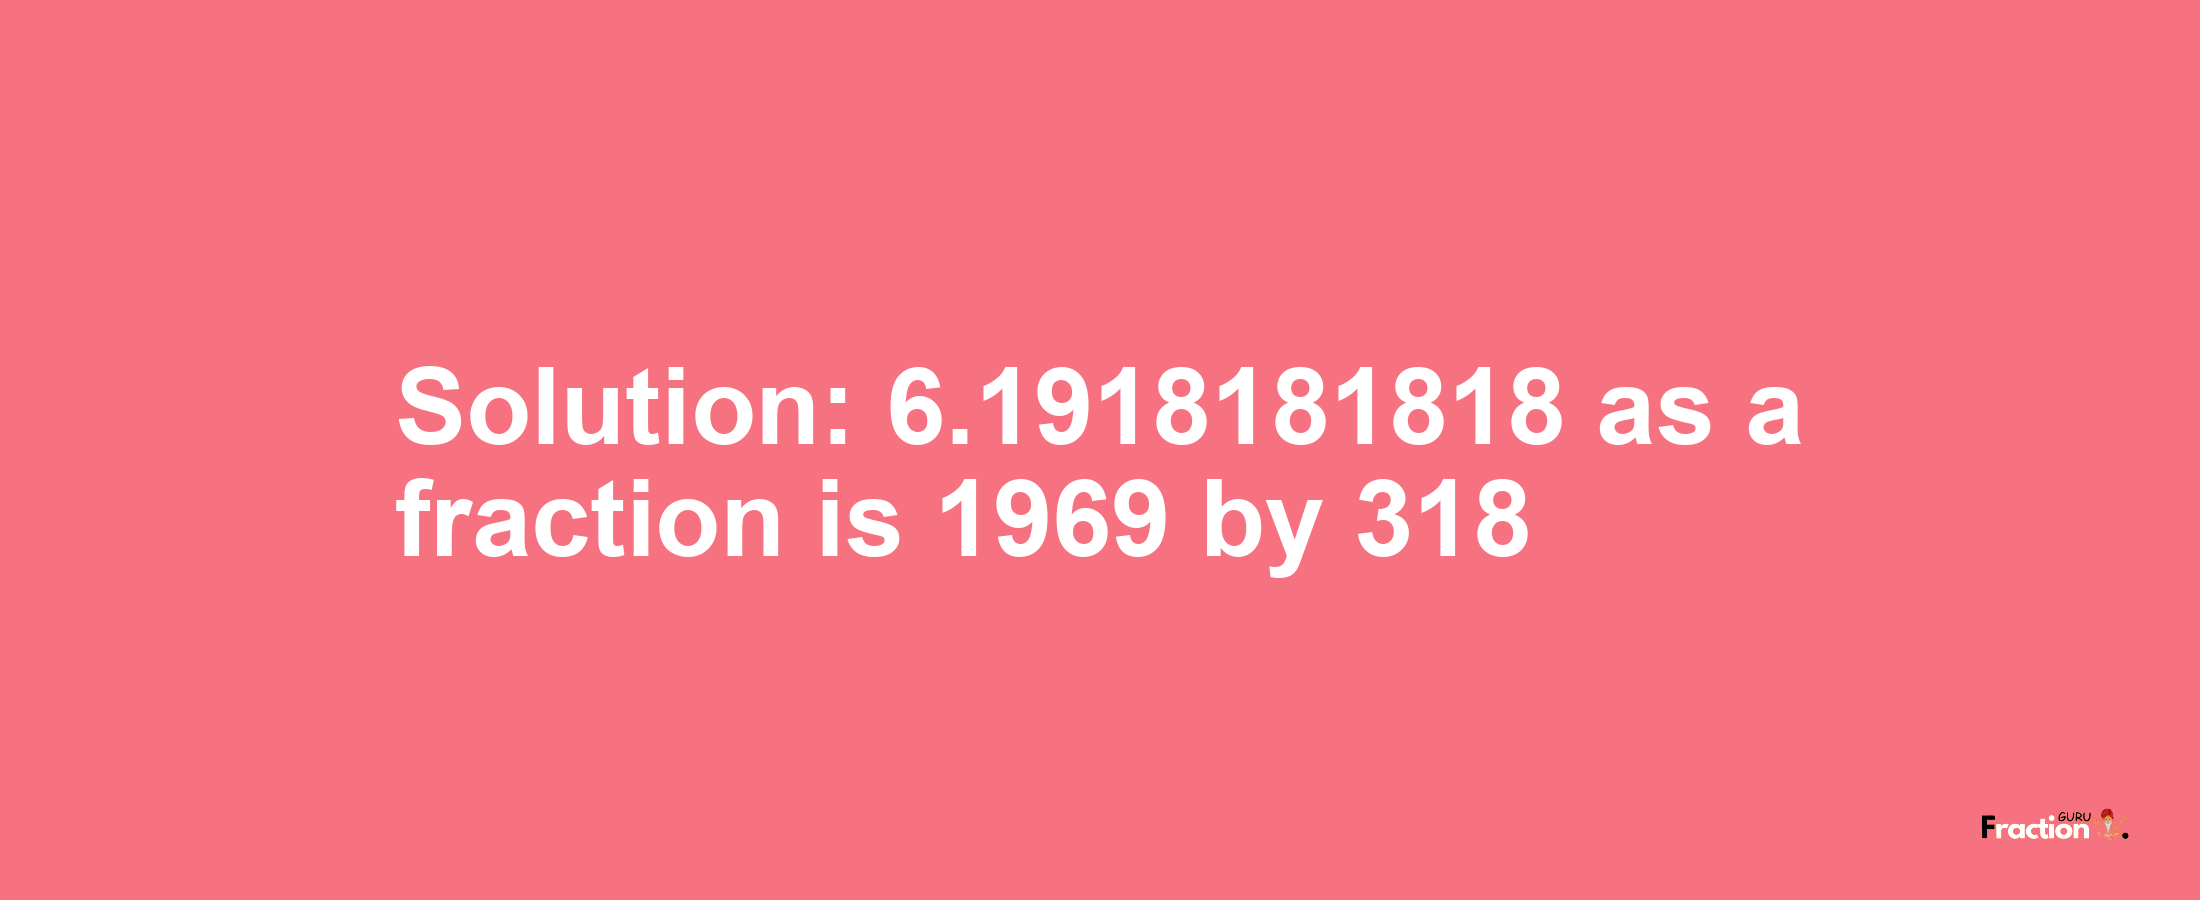 Solution:6.1918181818 as a fraction is 1969/318